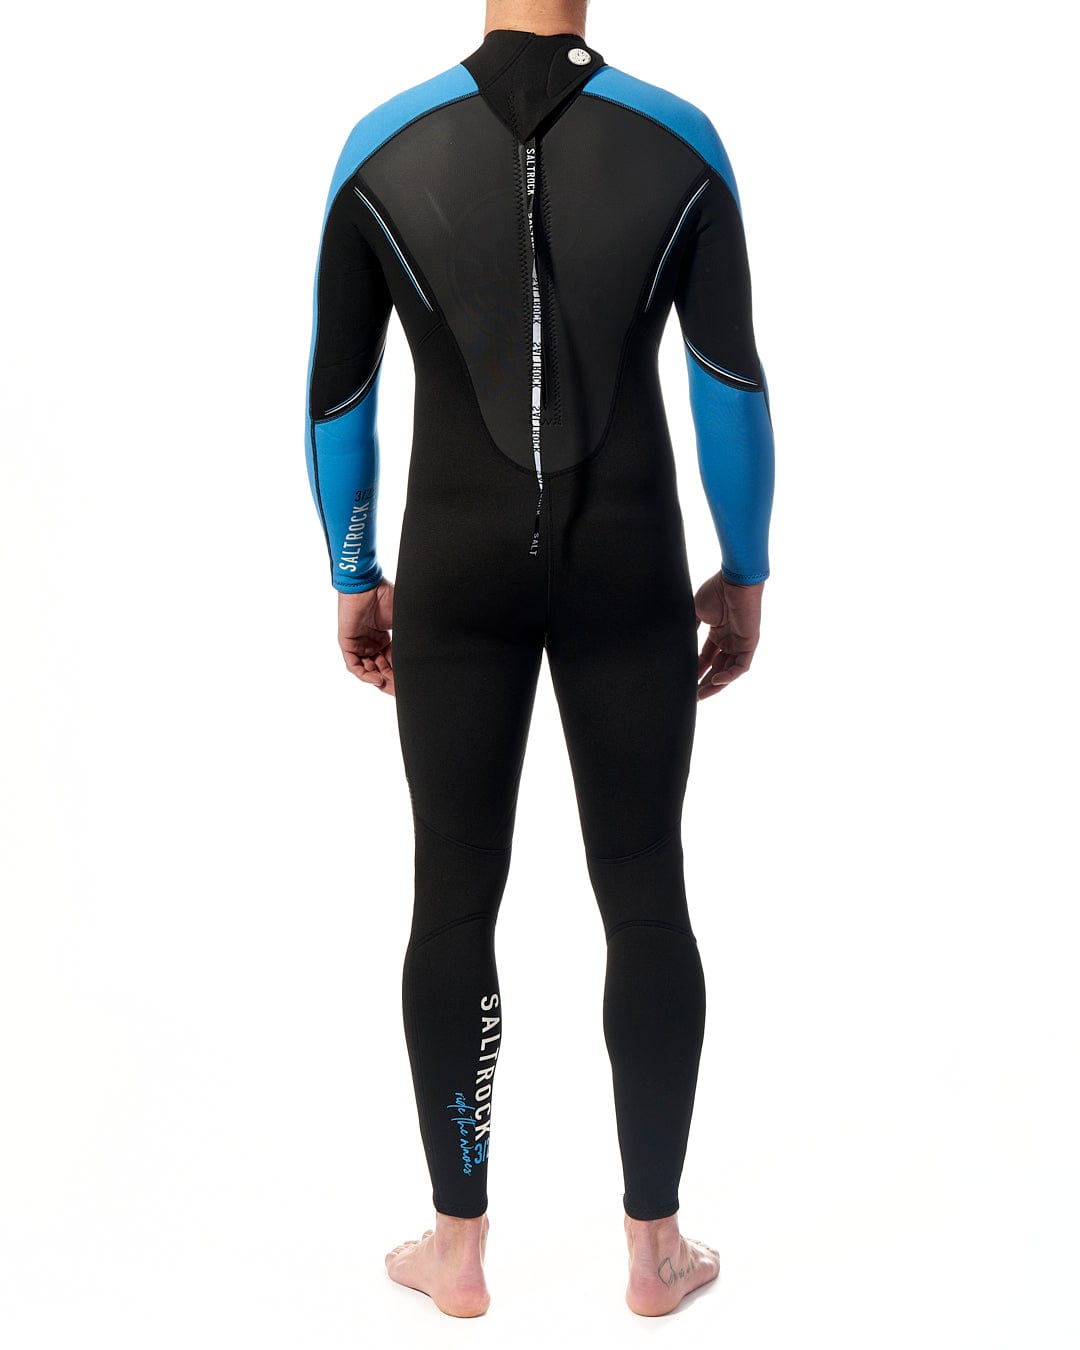 The back view of a man in a Saltrock Core - Mens 3/2 Full Wetsuit - Blue/Black.